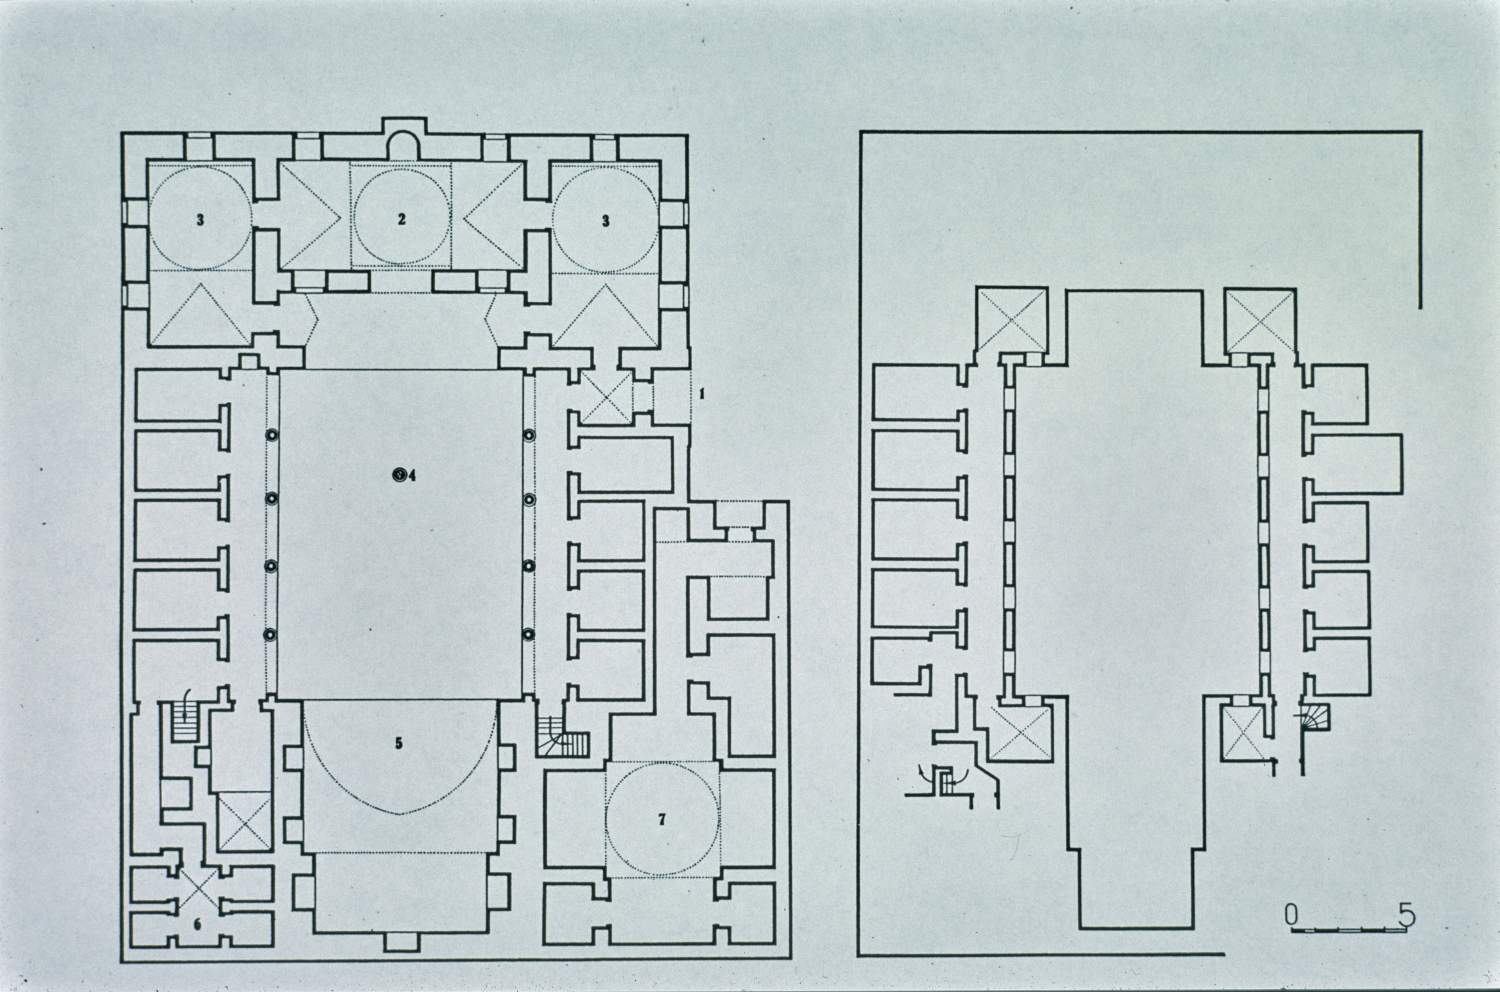 Plan of ground floor and second level.